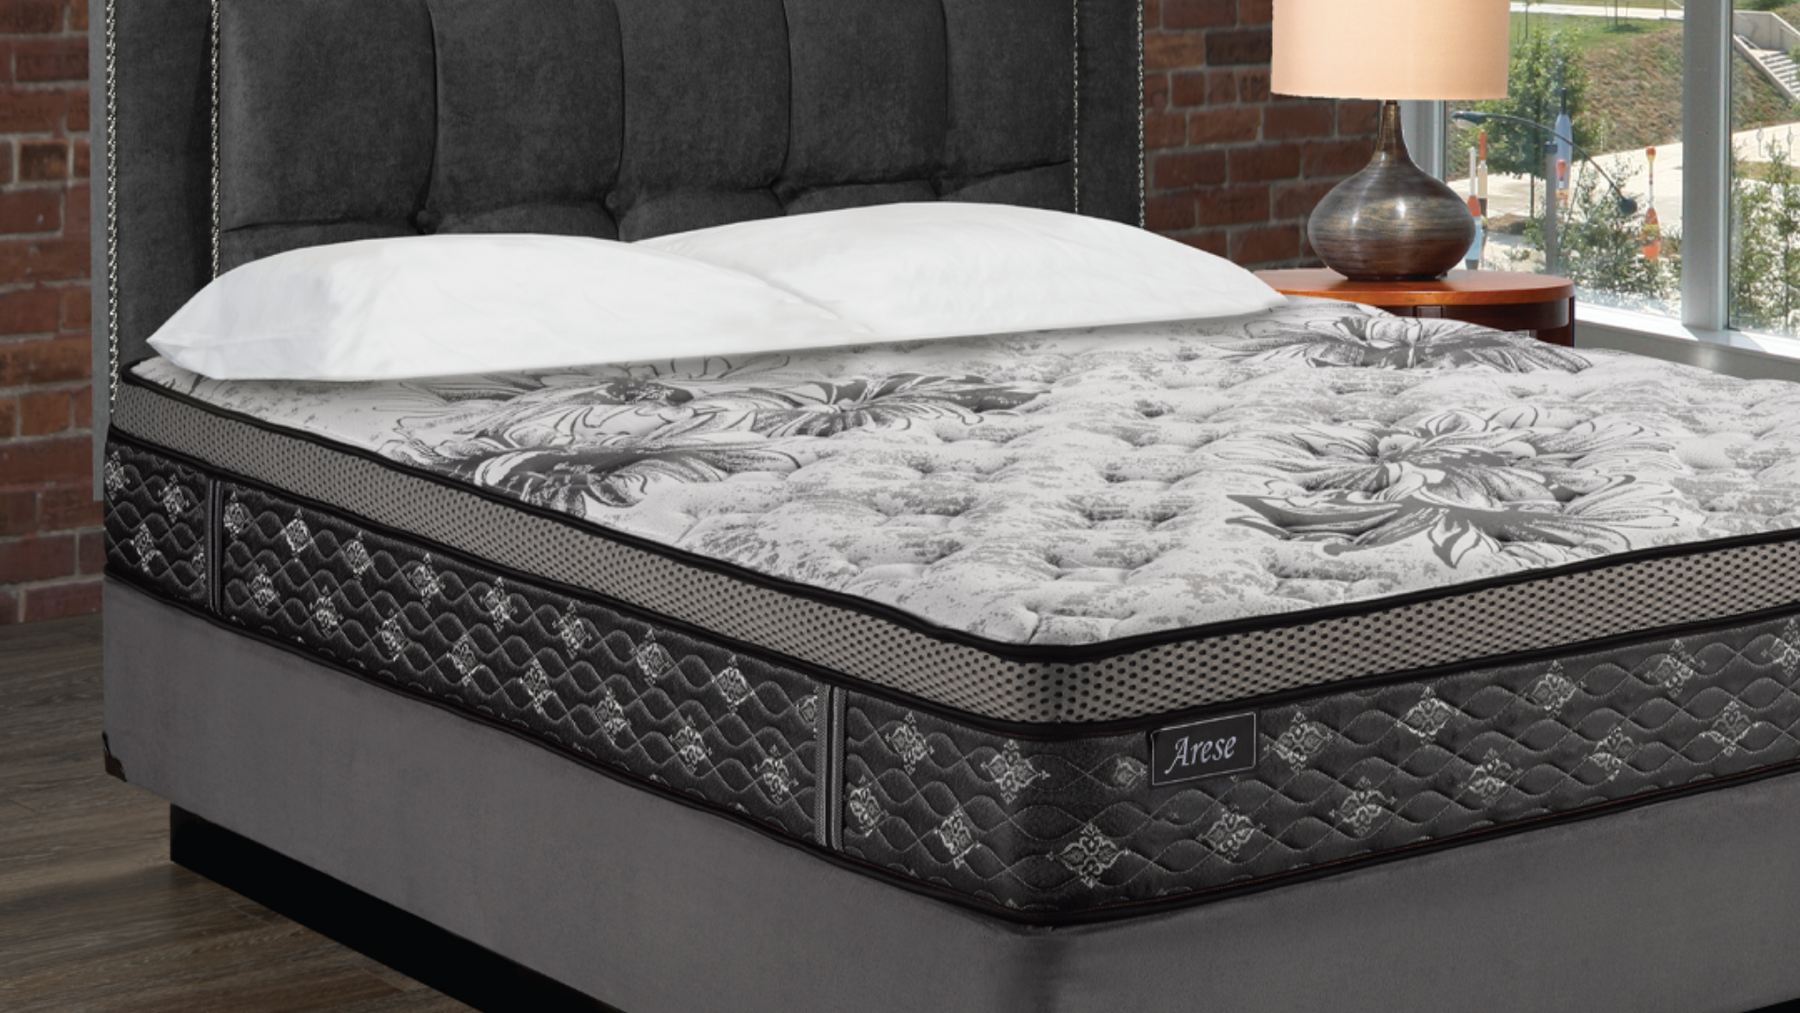 Experience Optimal Comfort and Support with the Arese 11.5" Luxury Pillow Top Mattress